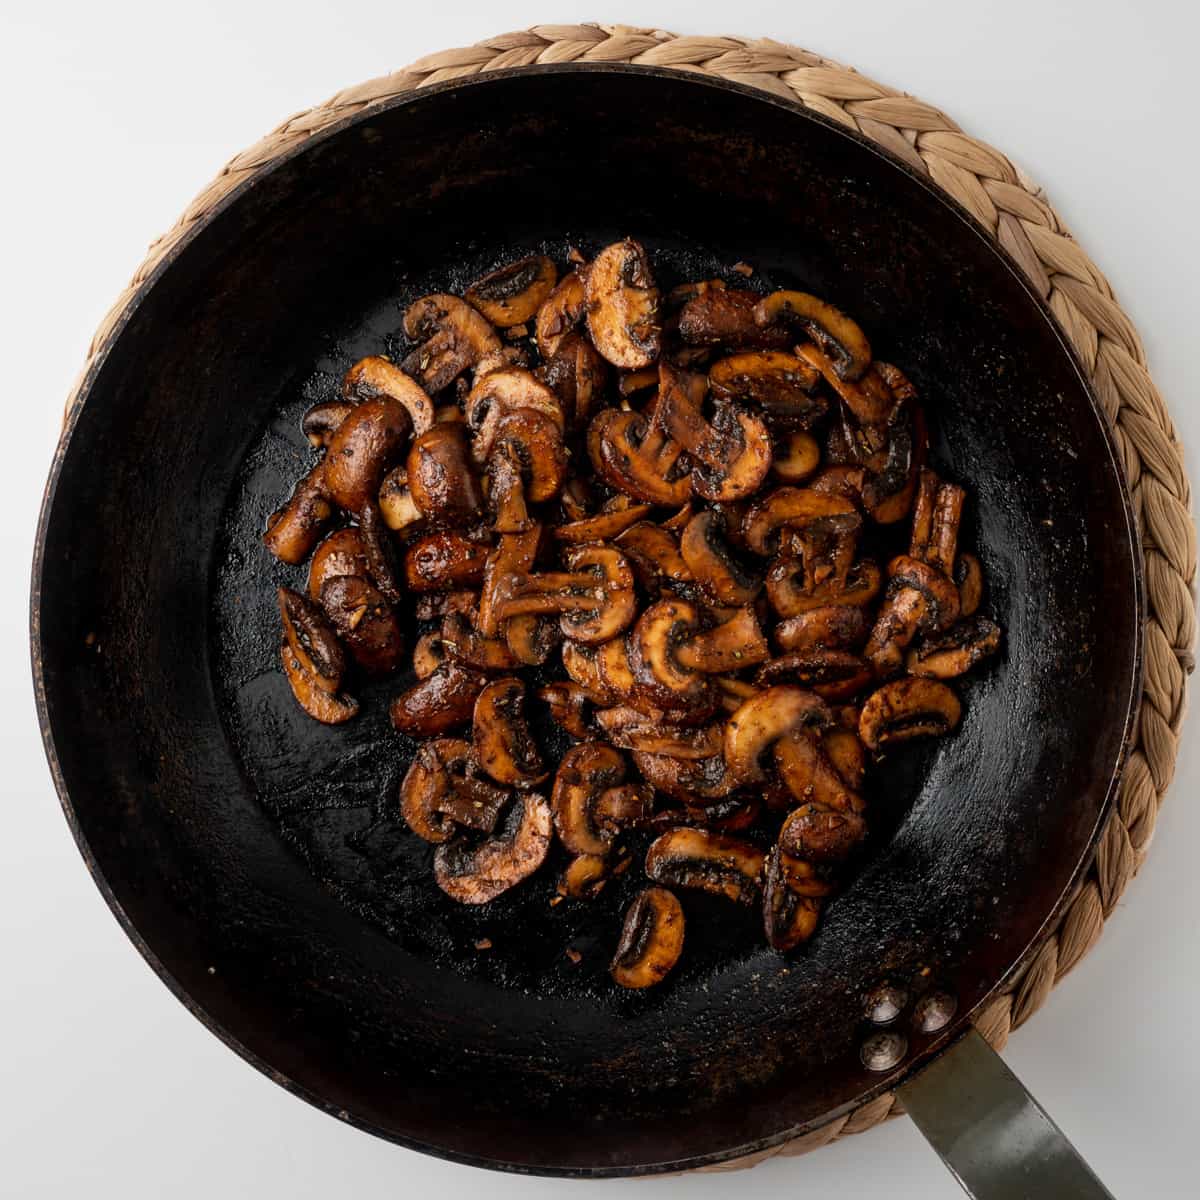 Sauteed mushrooms with the cooked down spice and soy sauce glaze.